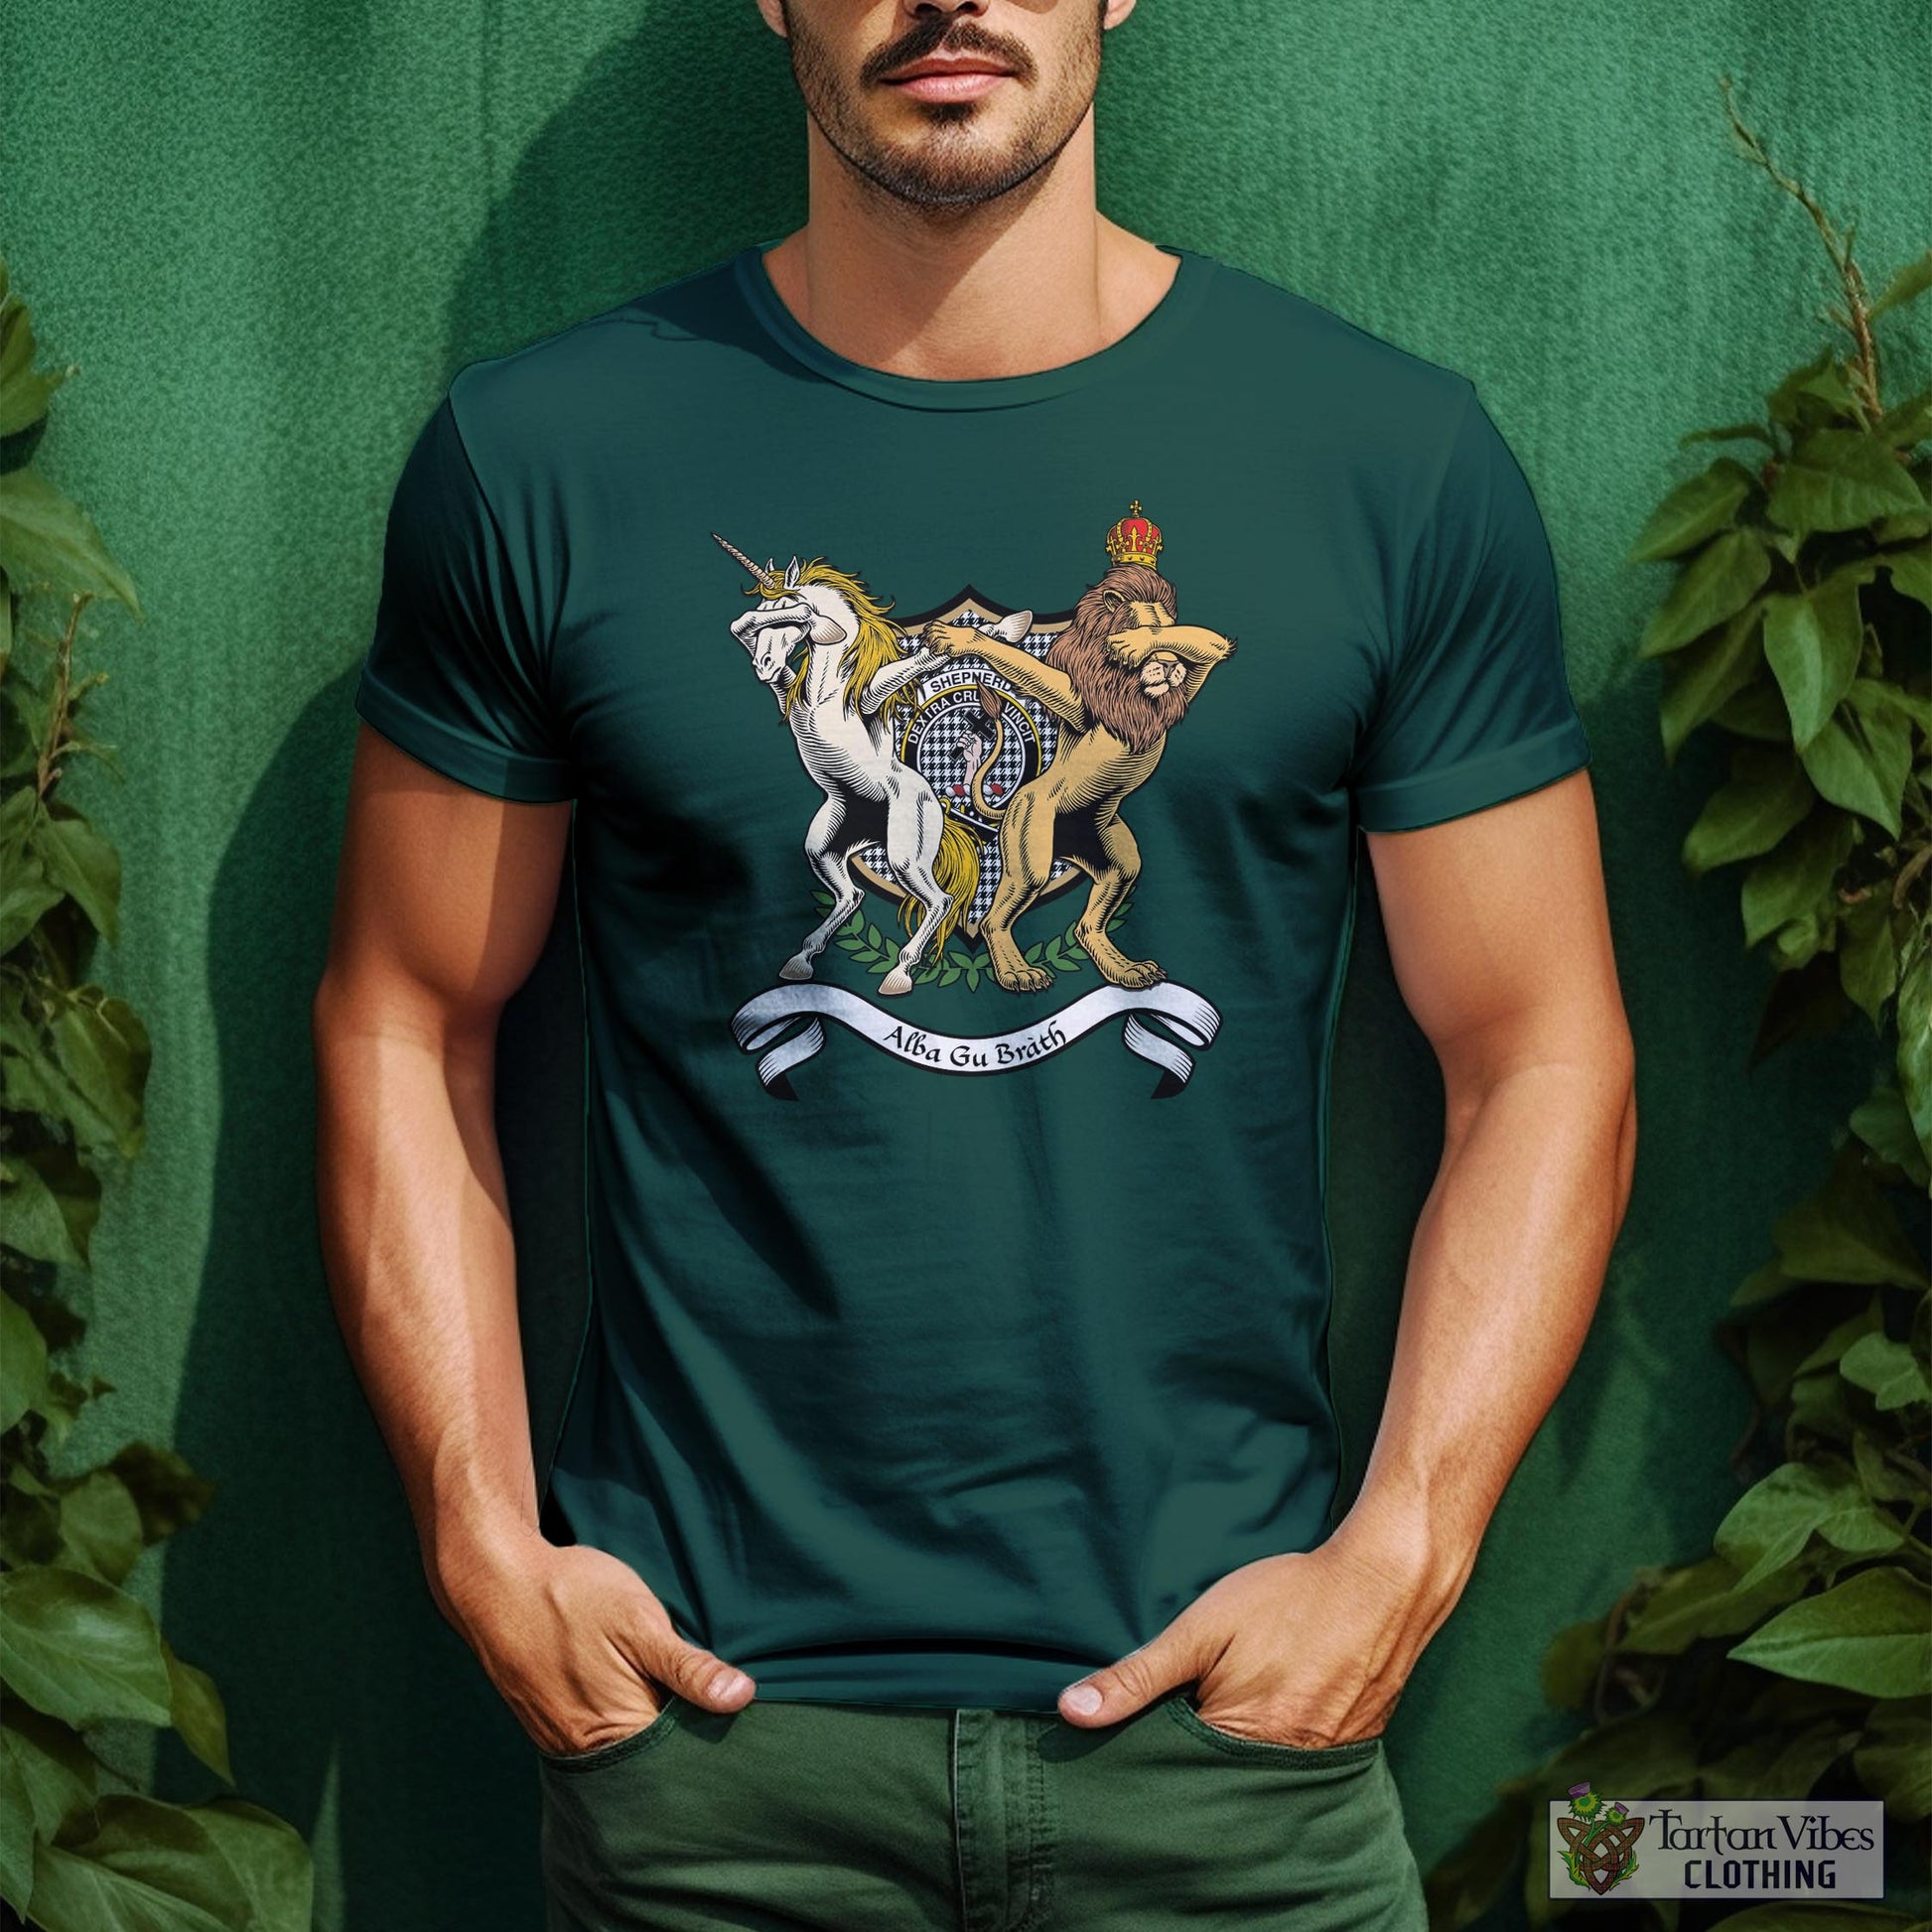 Tartan Vibes Clothing Shepherd Family Crest Cotton Men's T-Shirt with Scotland Royal Coat Of Arm Funny Style